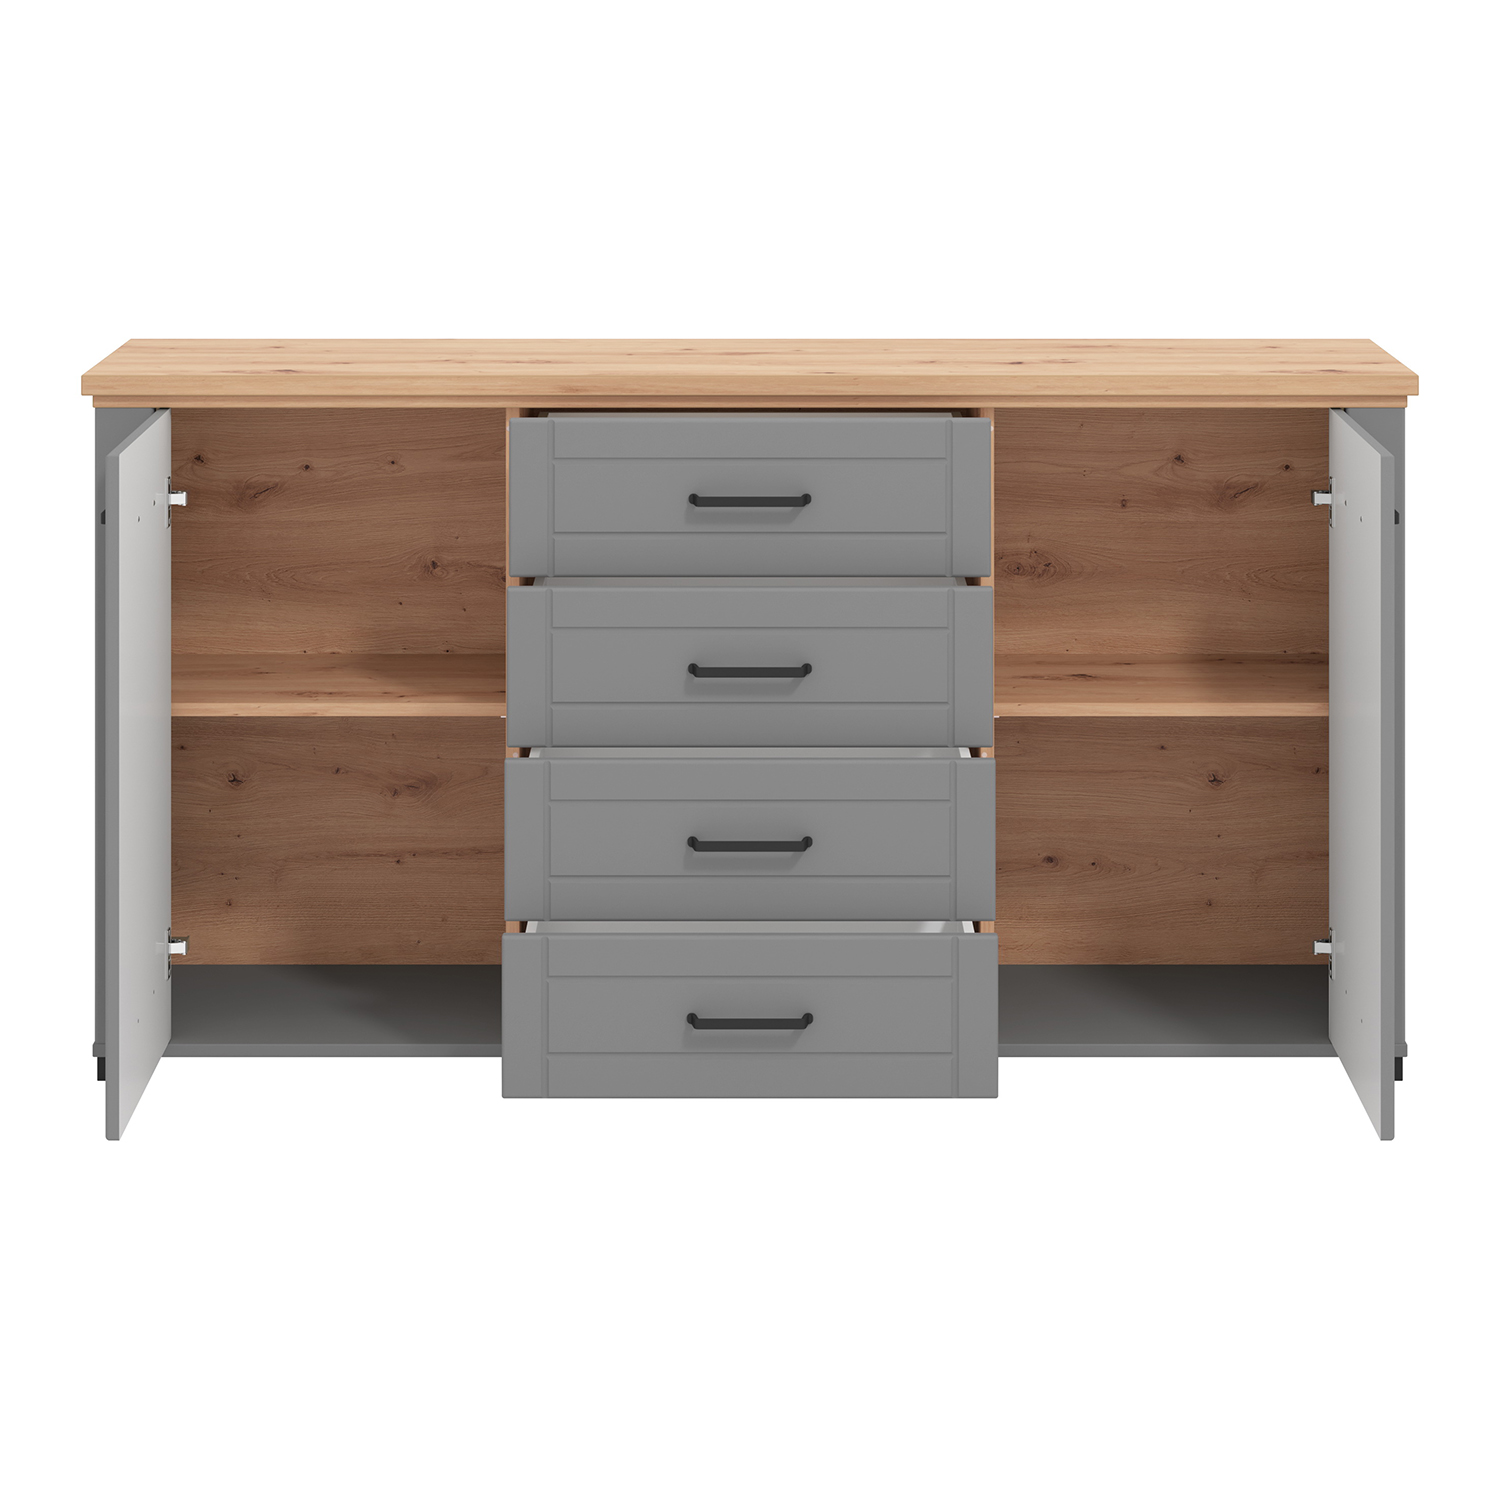 Chest of Drawers Sideboard Oak Matt Grey Wood Solid Cupboard with 4 Drawers